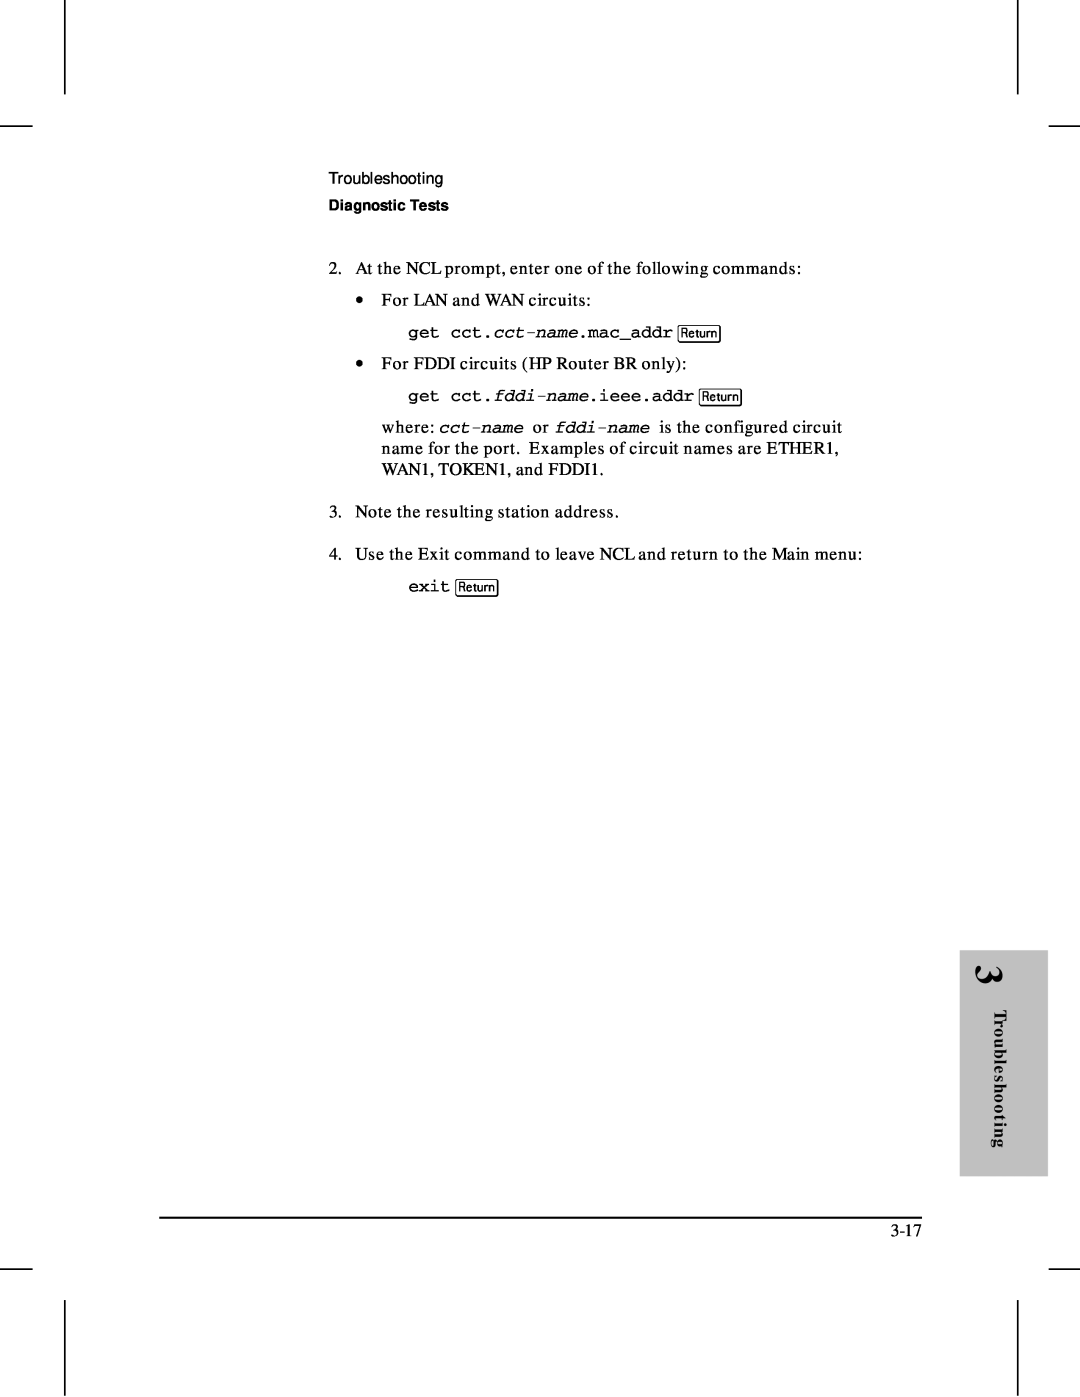 HP 480 manual Diagnostic Tests, At the NCL prompt, enter one of the following commands 